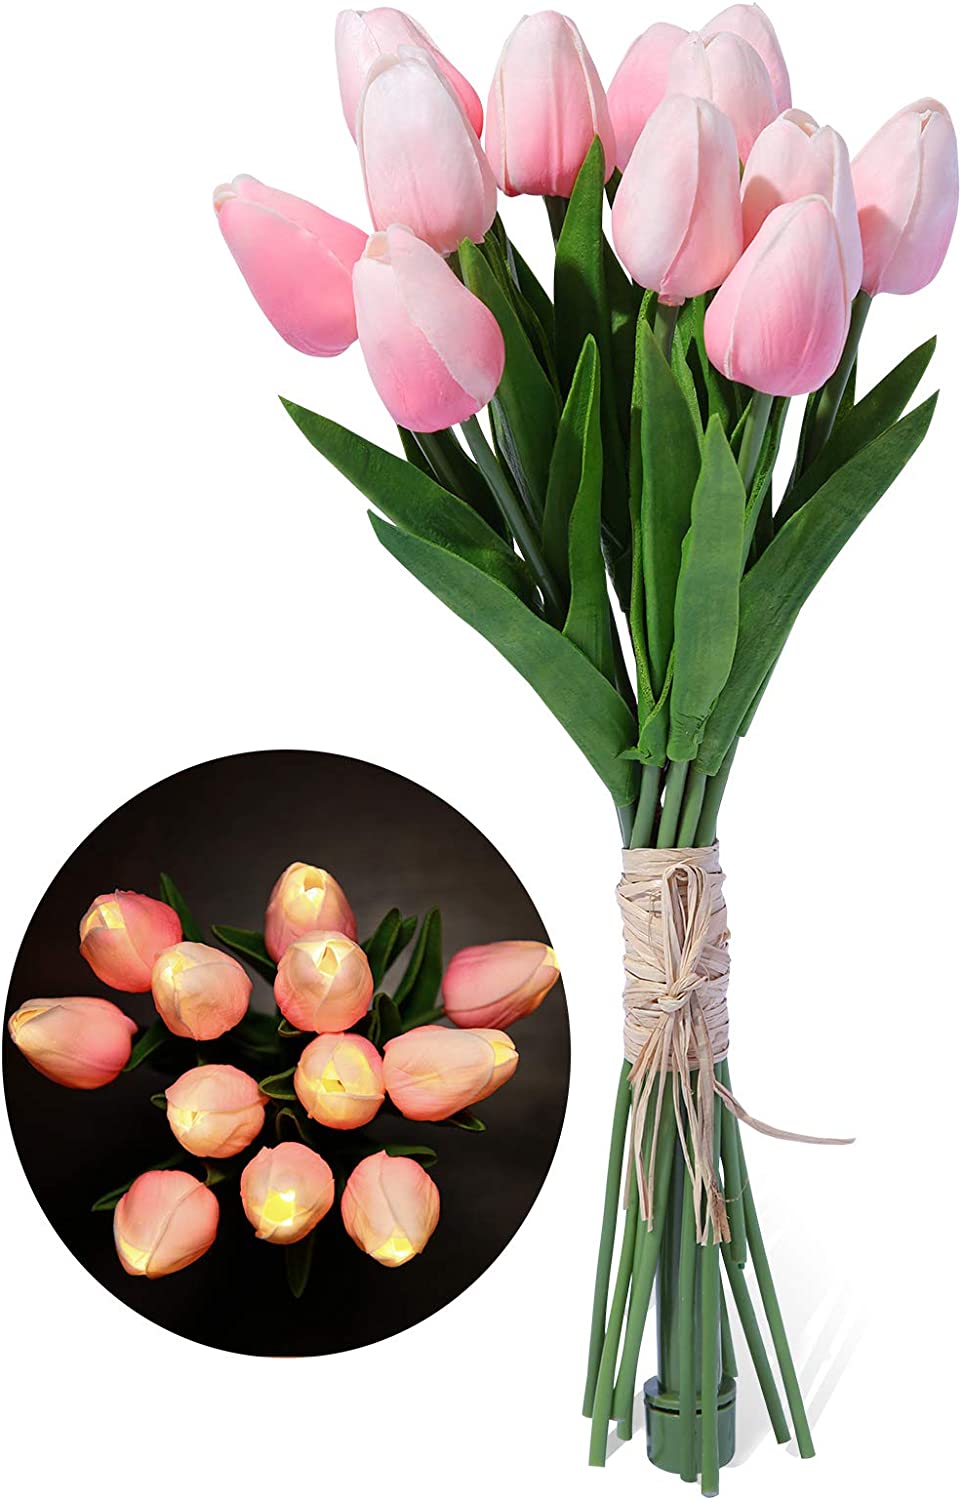 Artificial Flower Faux Tulip with LED Light 12 pcs Real Touch PU Flower Fake Bouquet for Wedding Party Home Office Decor Birthday etc Festival's Gift